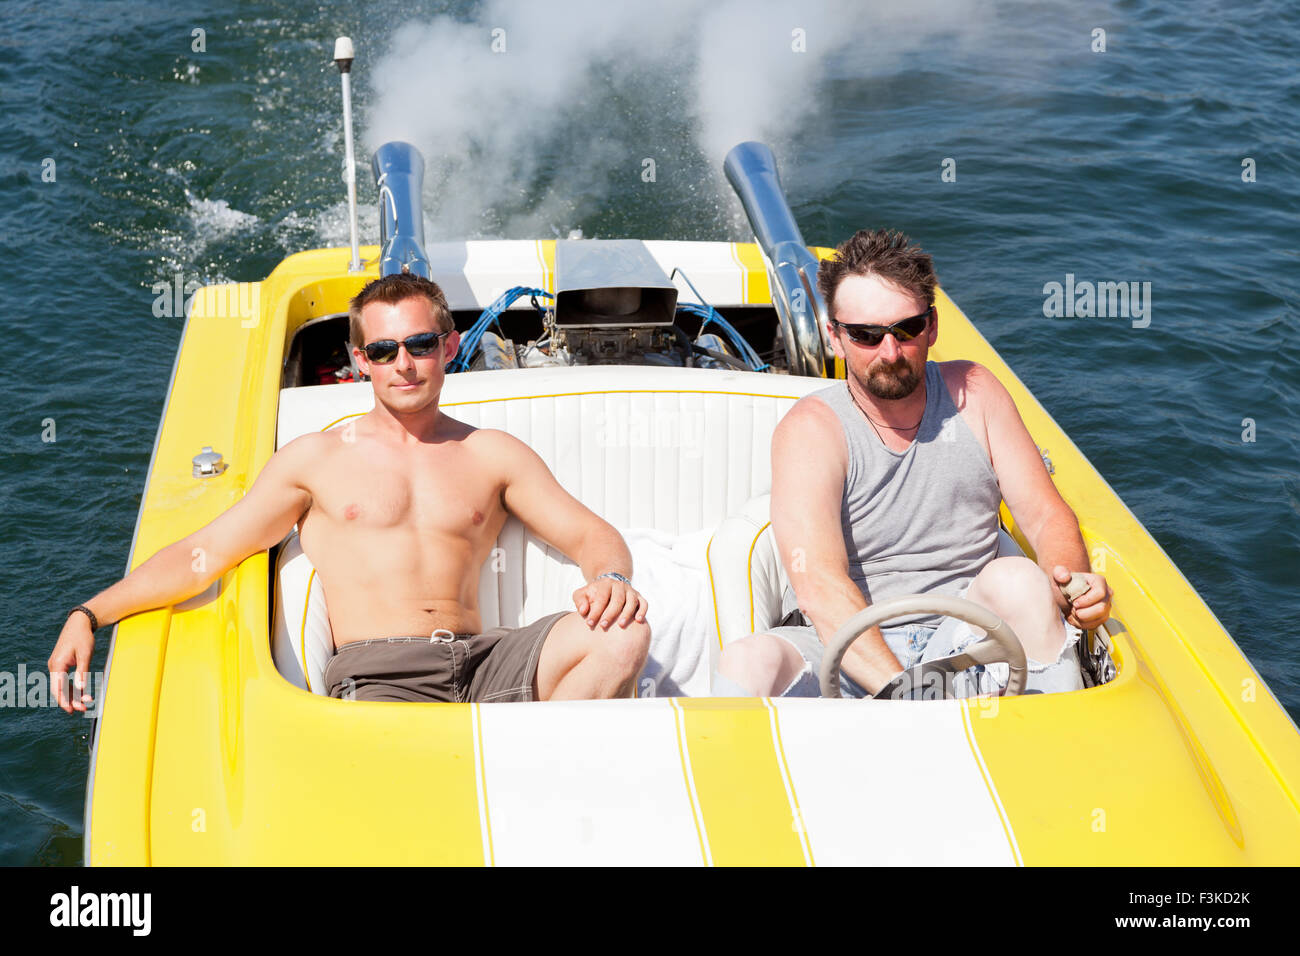 two-guys-in-a-yellow-and-white-speedboat-in-the-sunshine-on-lake-coeur-F3KD2K.jpg